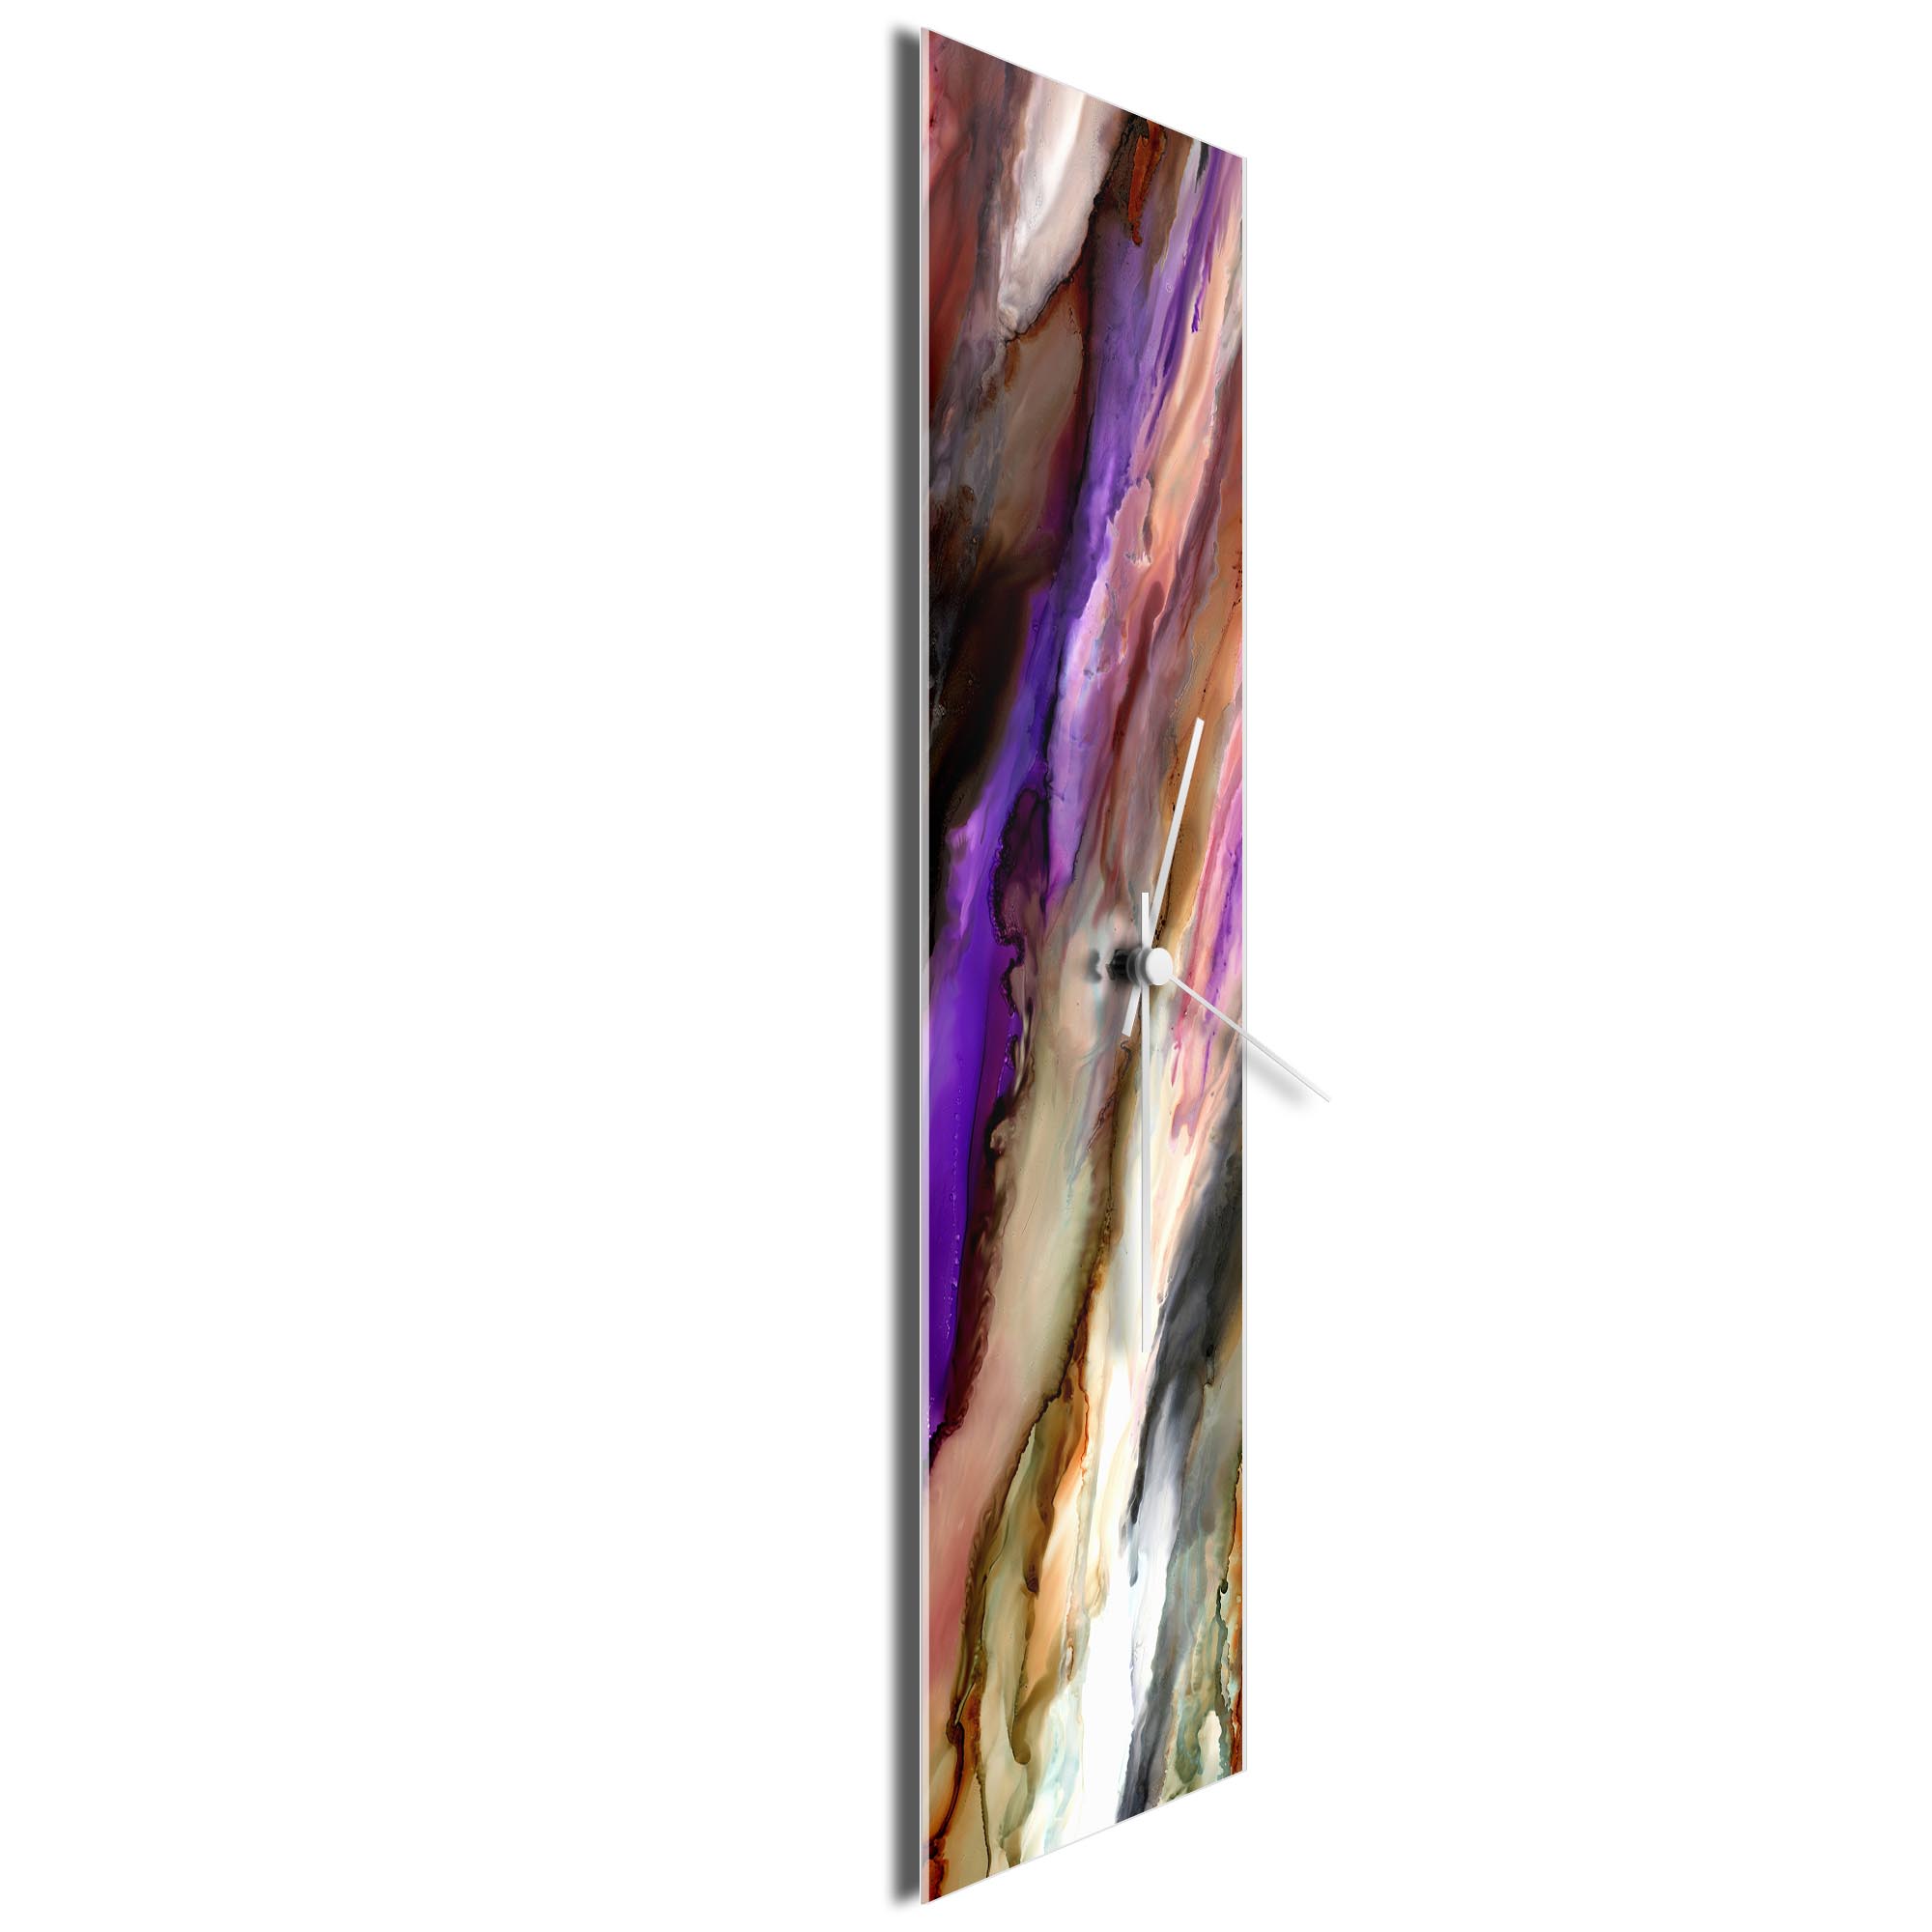 Violet Onyx Clock by NAY - Modern Wall Clock, Contemporary Home Decor (9x30in.) - Image 2